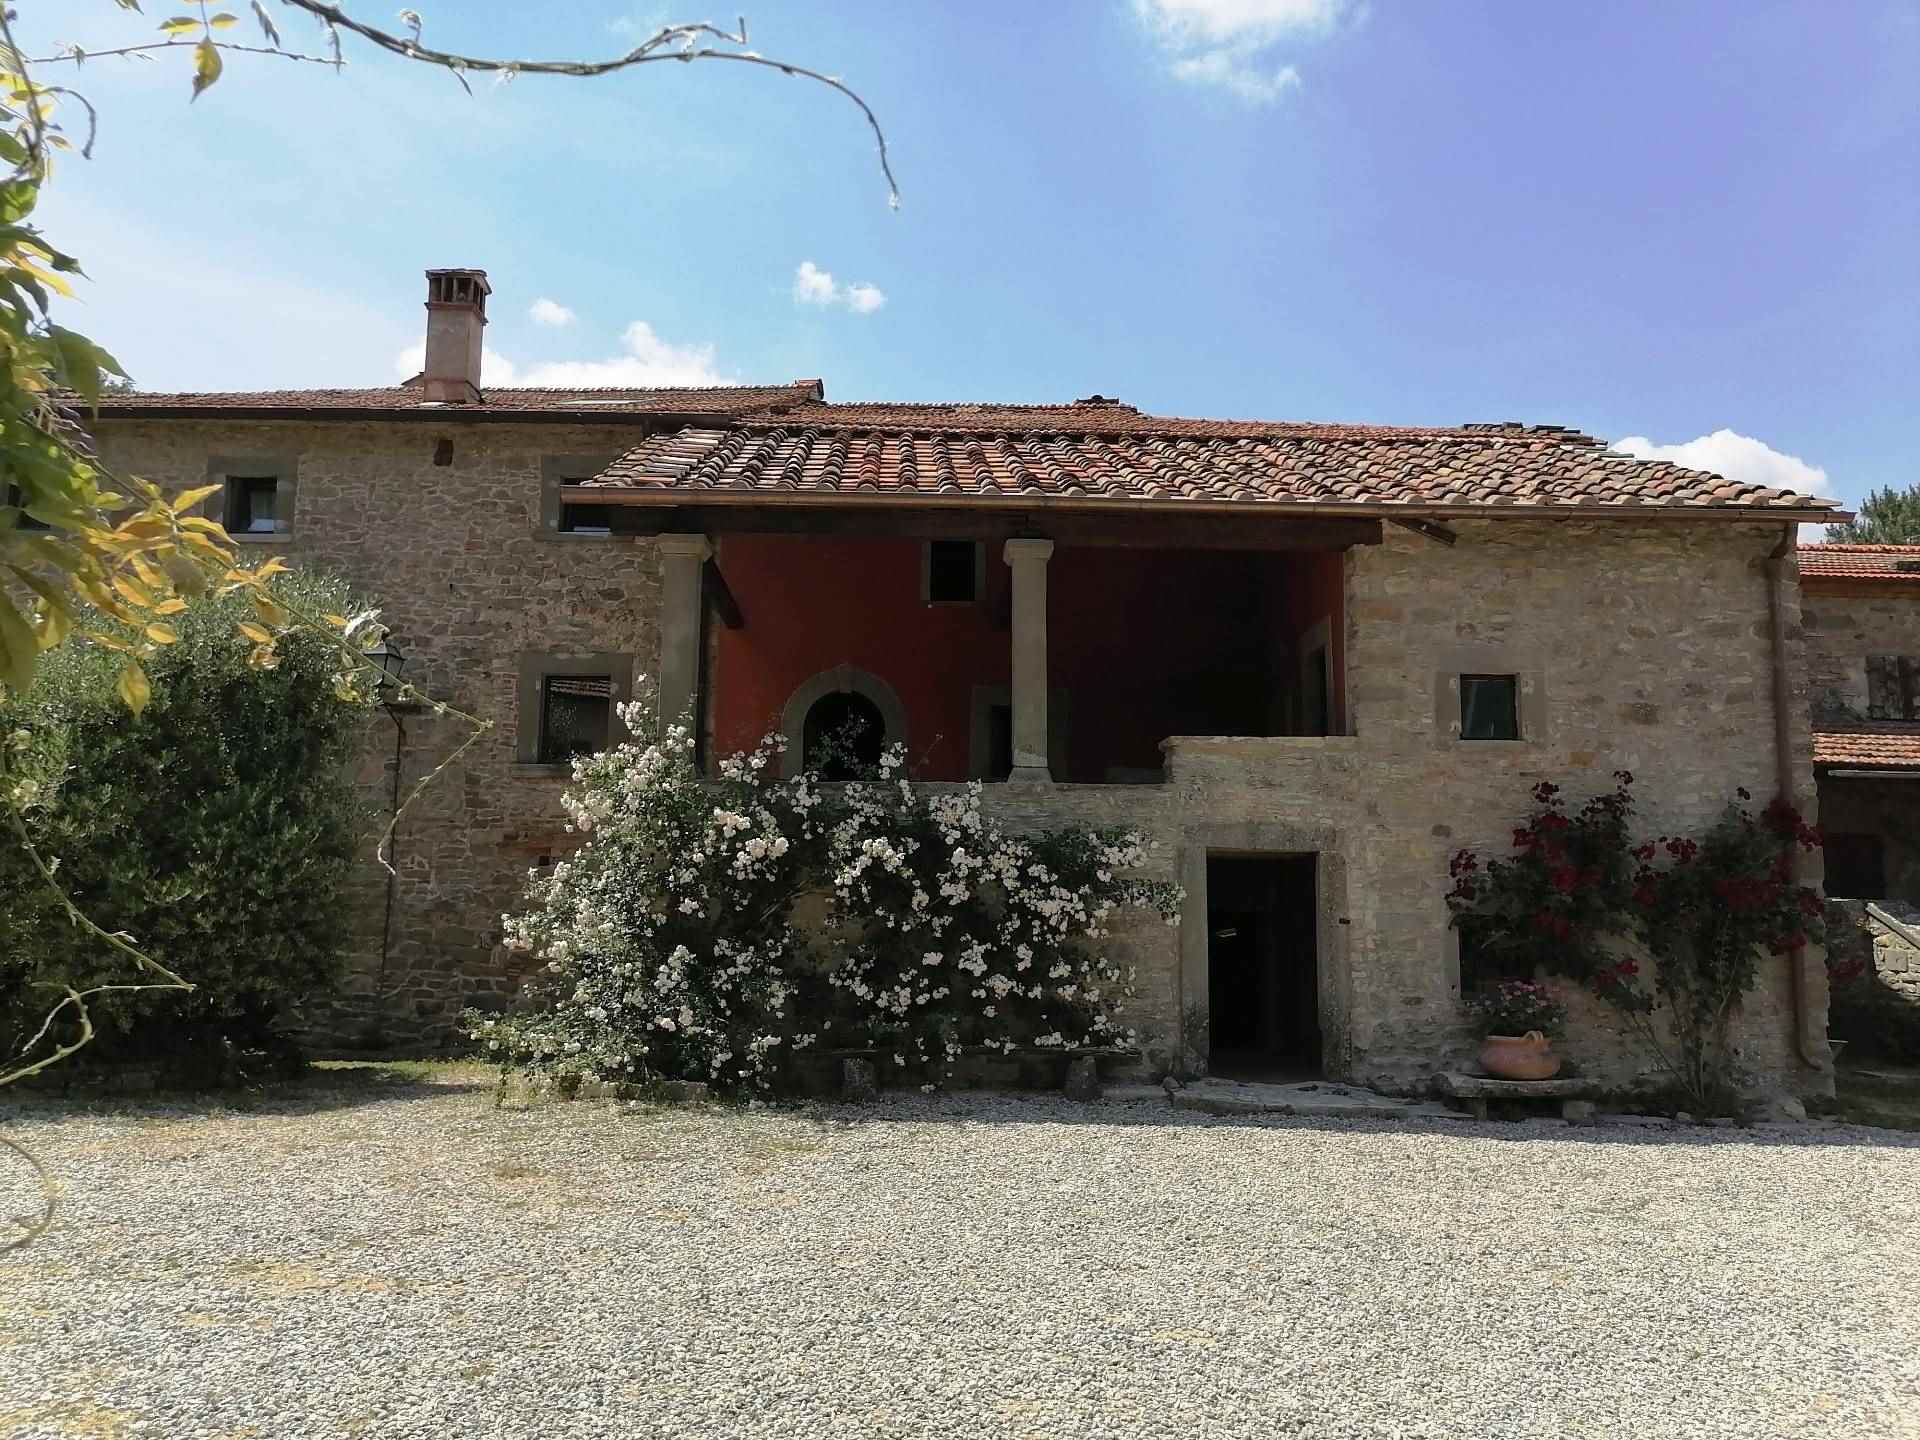 Detached apartment in SAN GODENZO